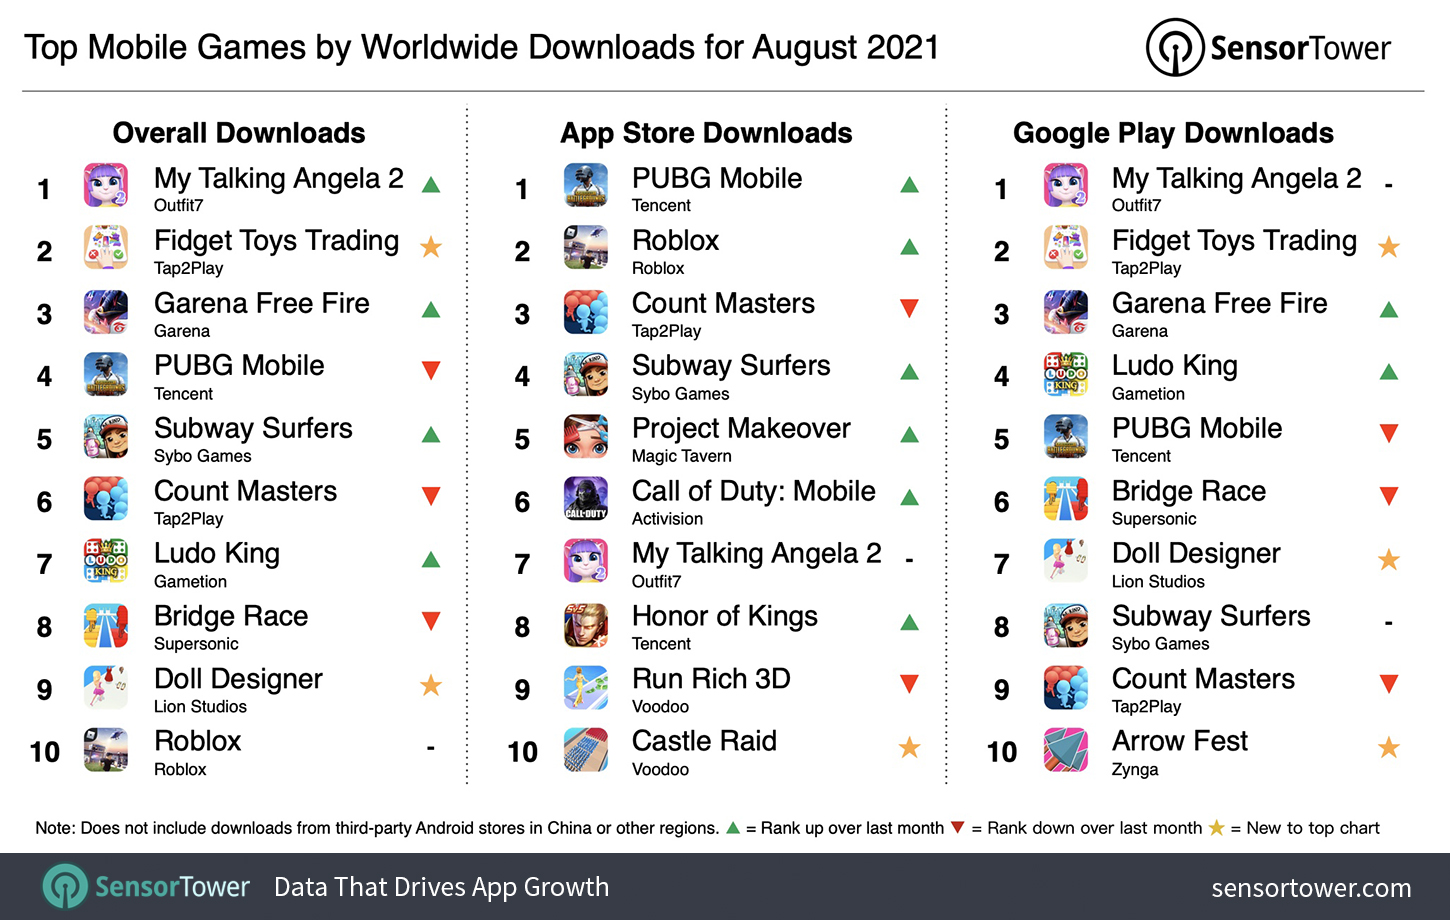 Top Mobile Games Worldwide for August 2021 by Downloads